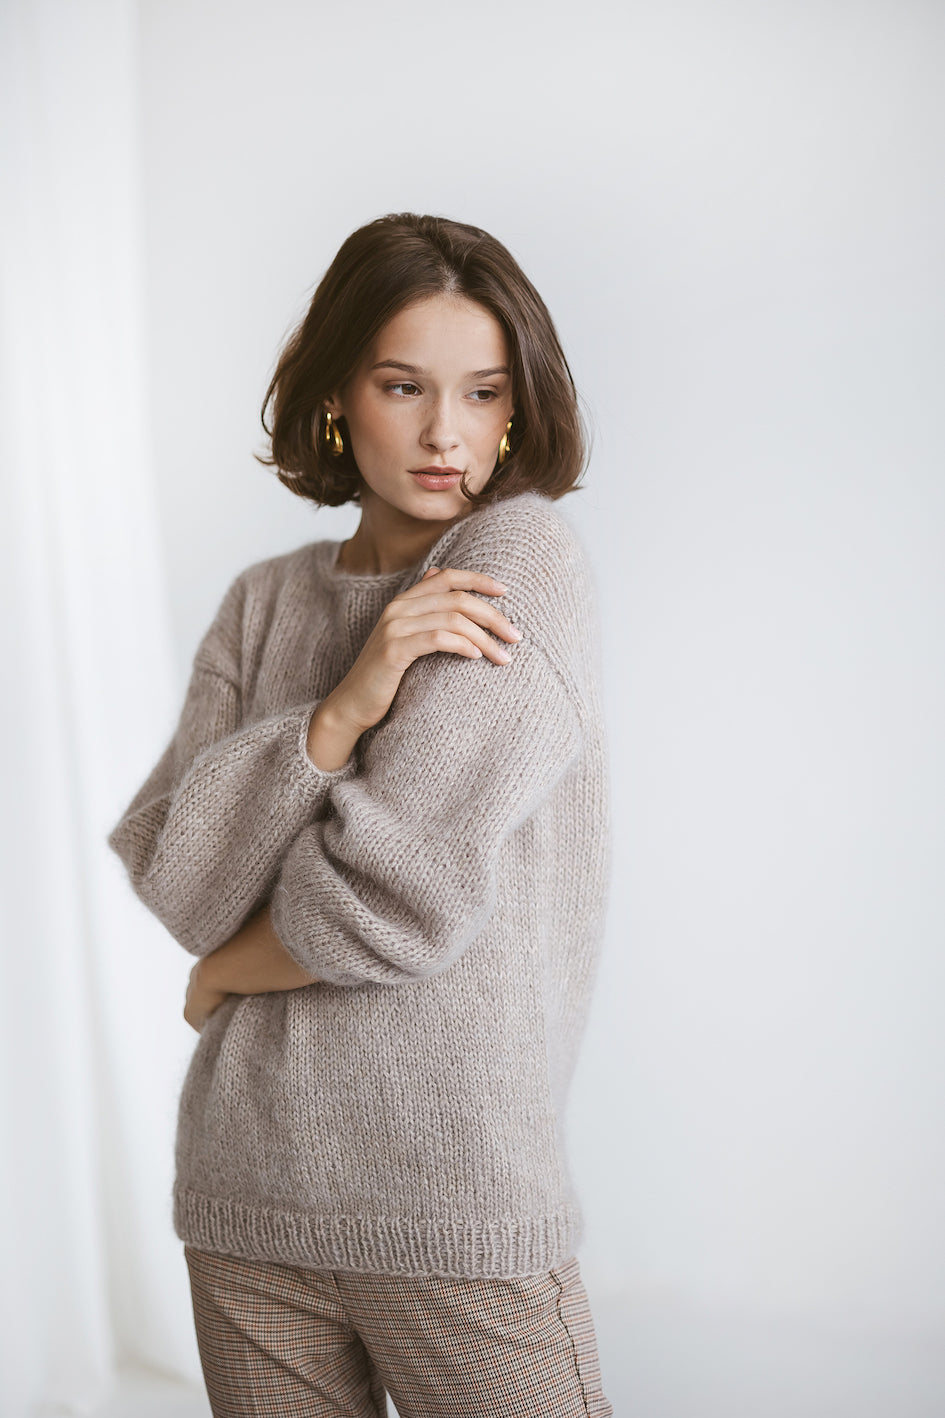 Beige mohair knitted thick sweater, camel alpaca wool blend jumper, taupe fuzzy cable knit pullover, creamy fluffy slightly oversized pull